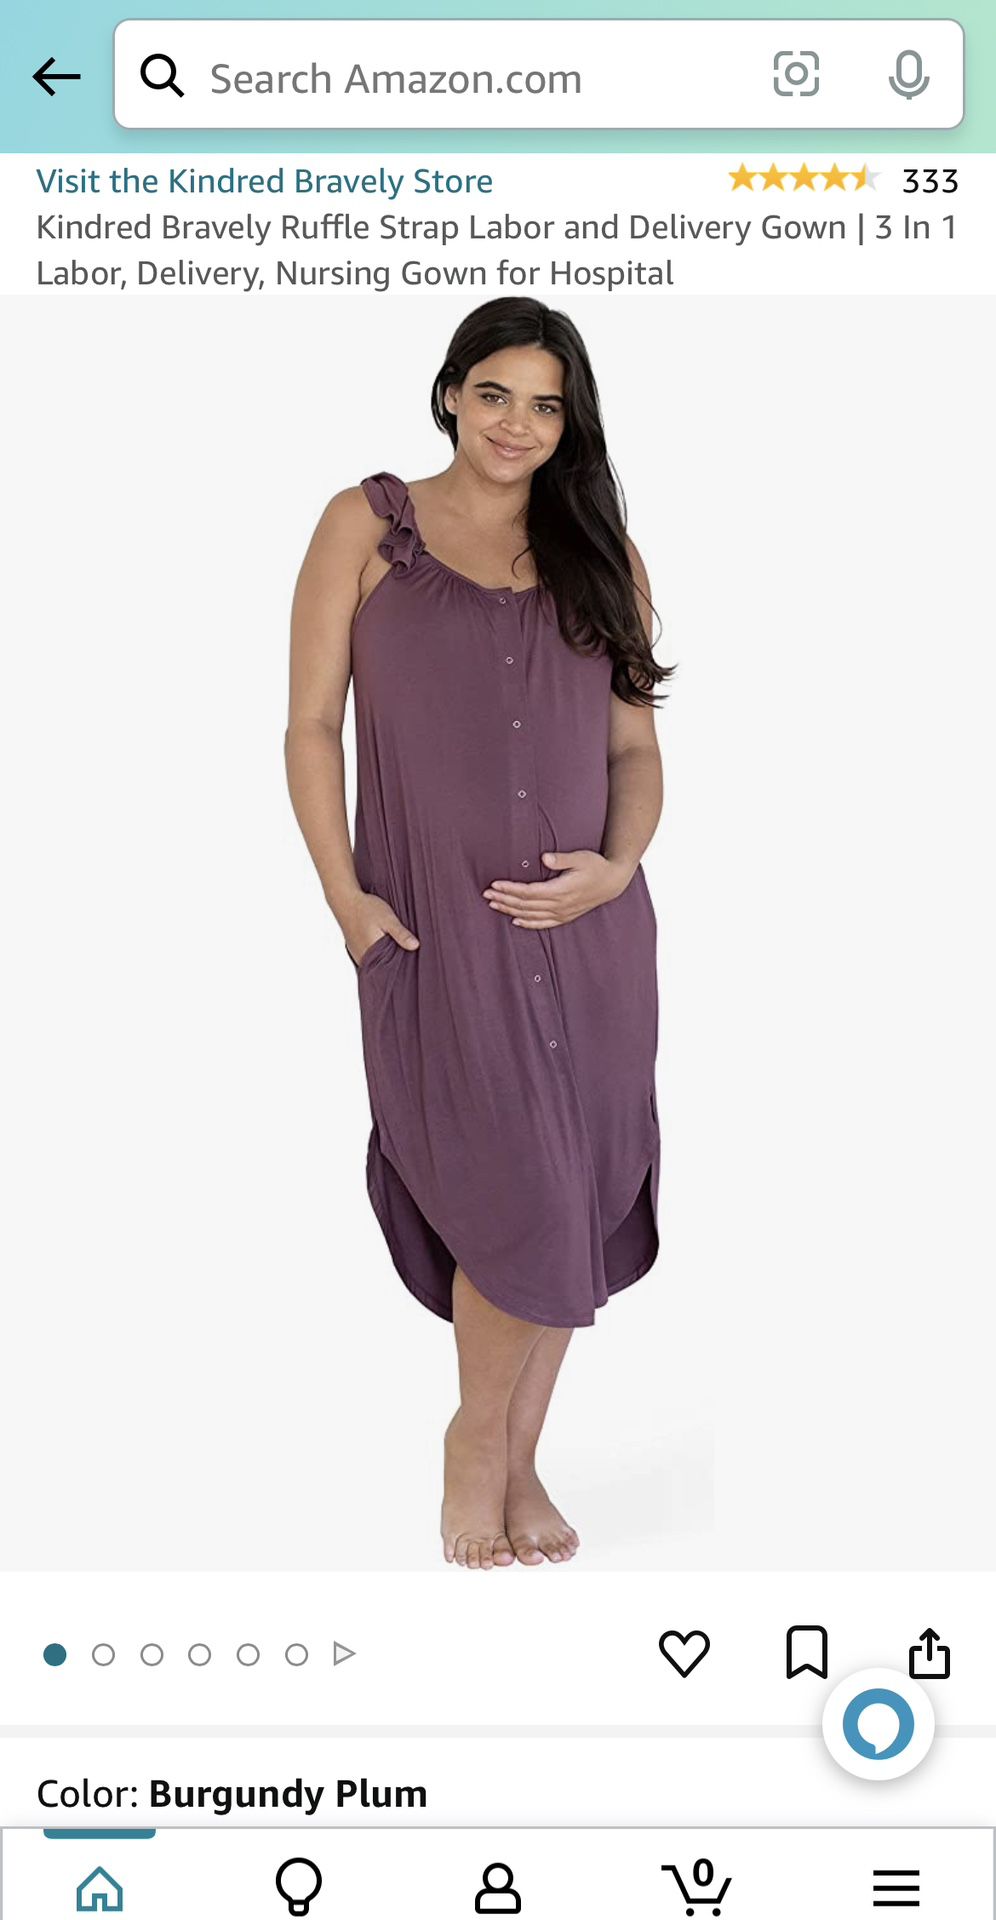 Kindred Bravely Ruffle Strap Labor and Delivery Gown  3 In 1 Labor,  Delivery, Nursing Gown for Hospital for Sale in Corona, CA - OfferUp